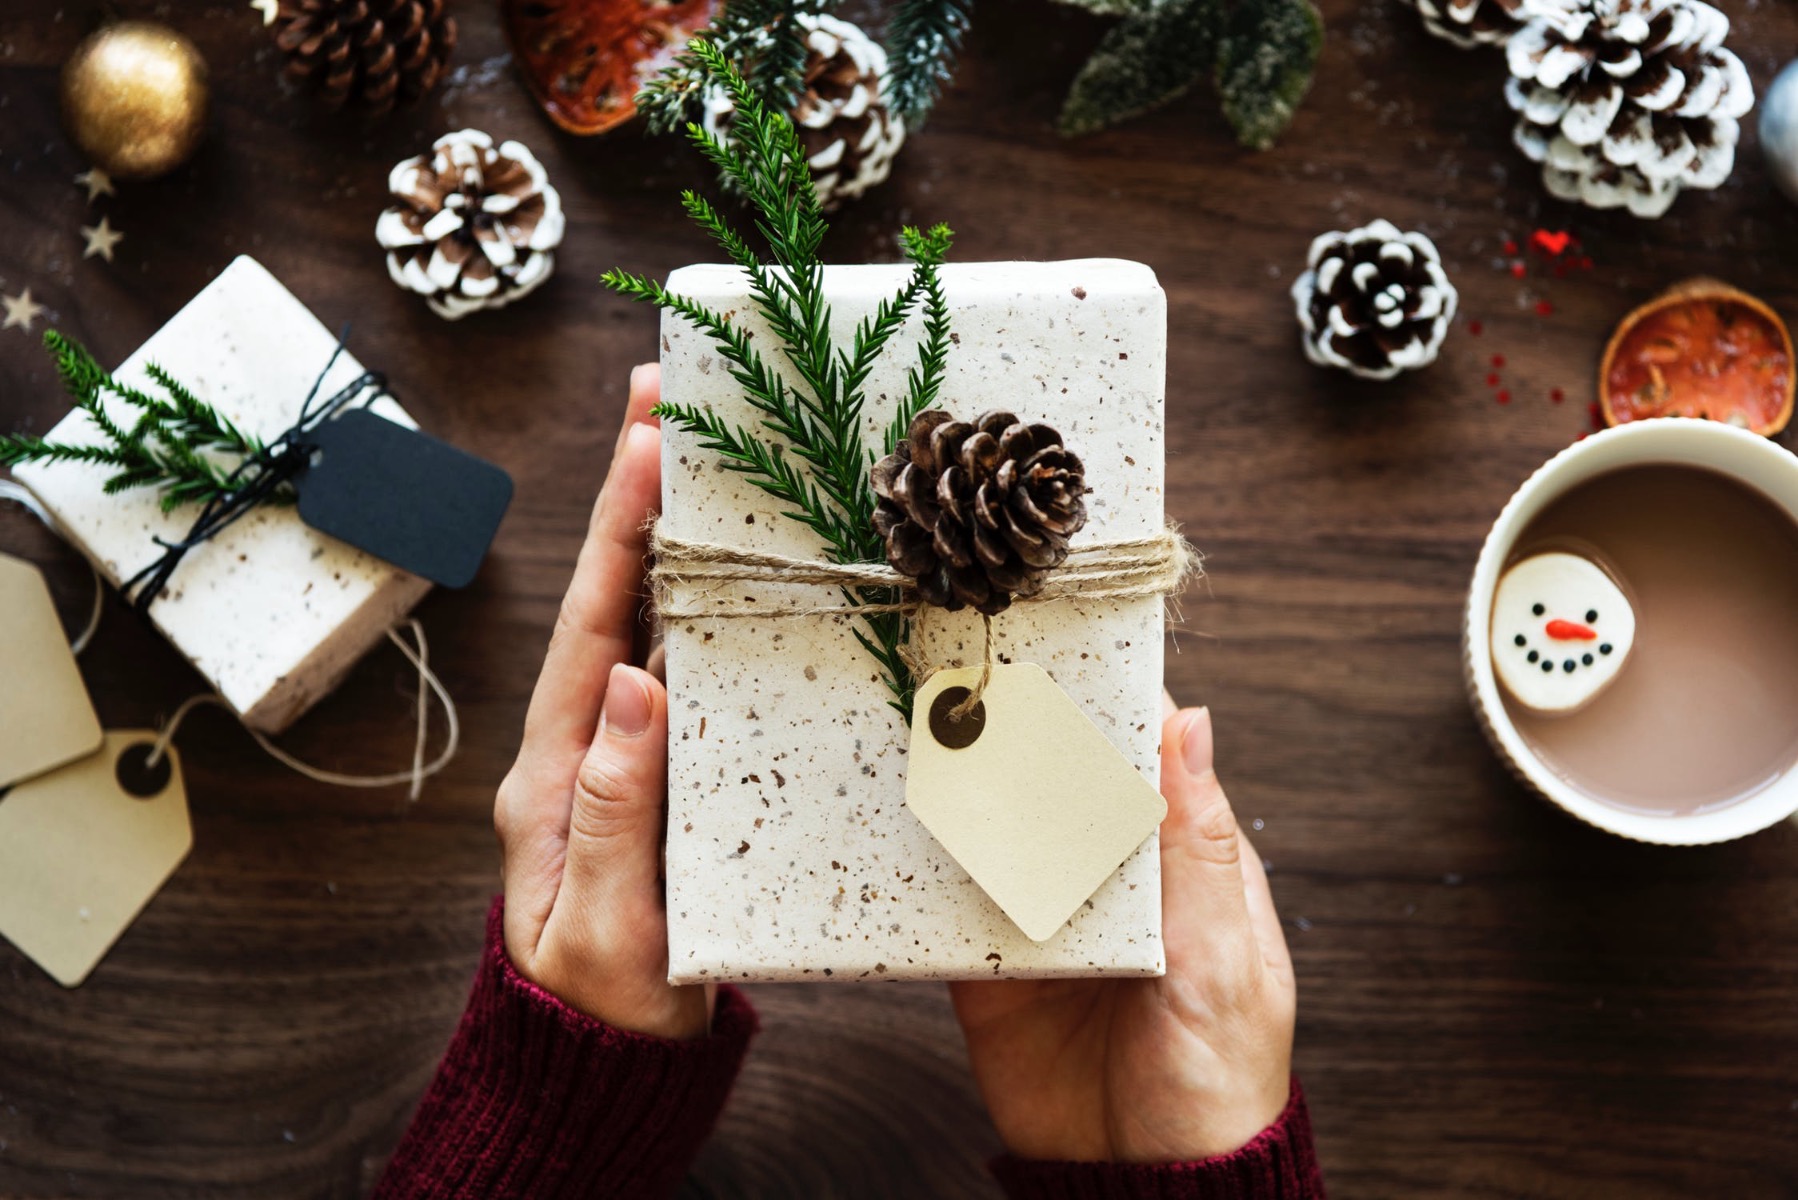 A present wrapped in which paper with a garnished with greenery and a pinecone 